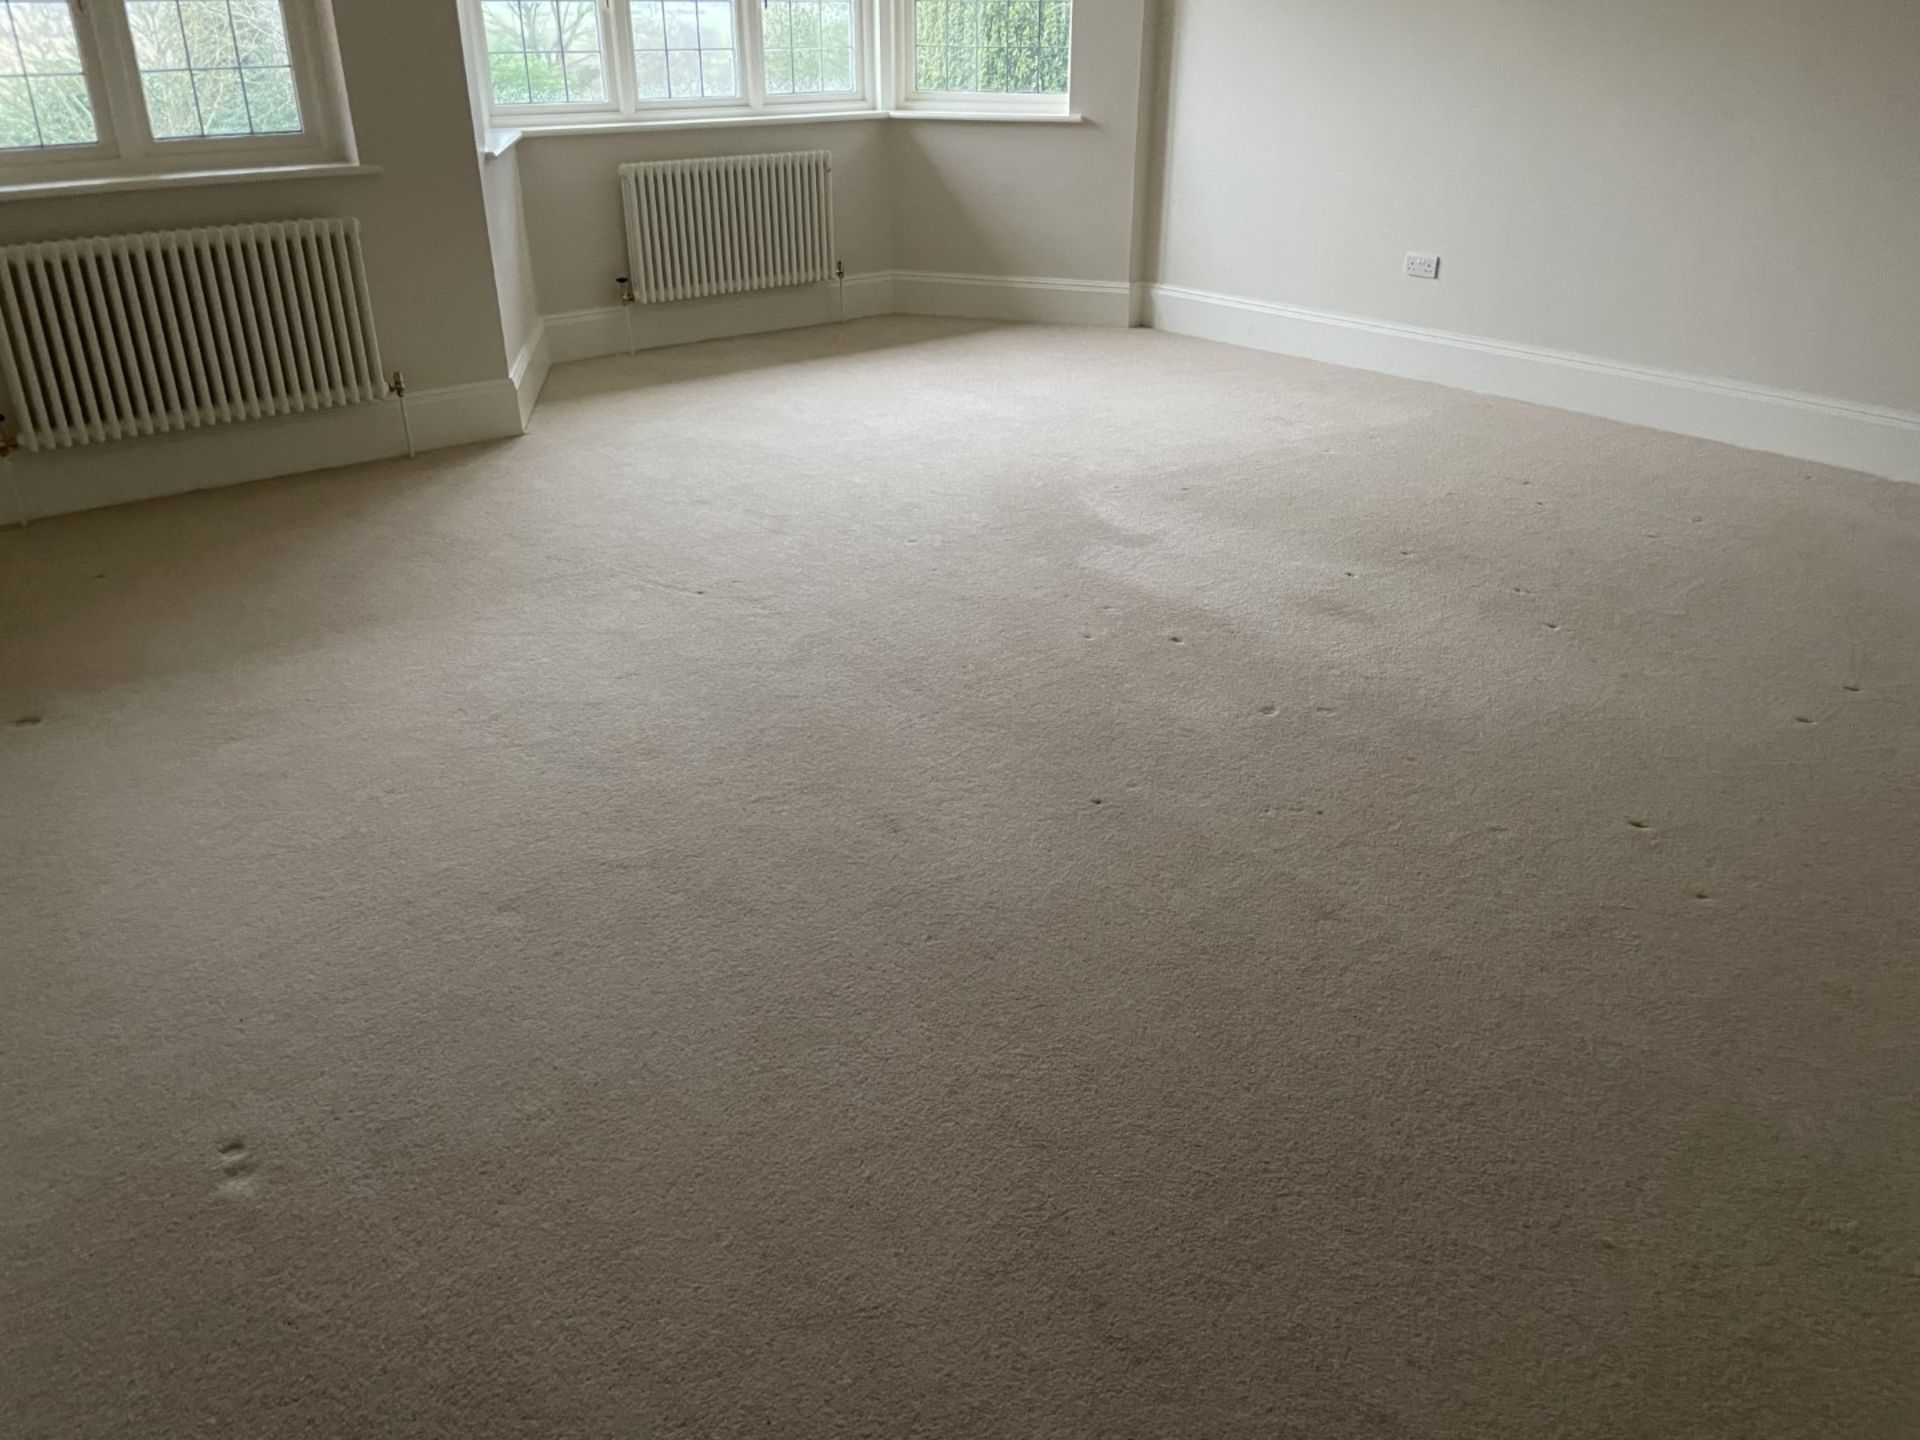 1 x Luxury Wool Bedroom + Dressing Room Carpets in a Neutral Tone with Premium Underlay - Image 2 of 11